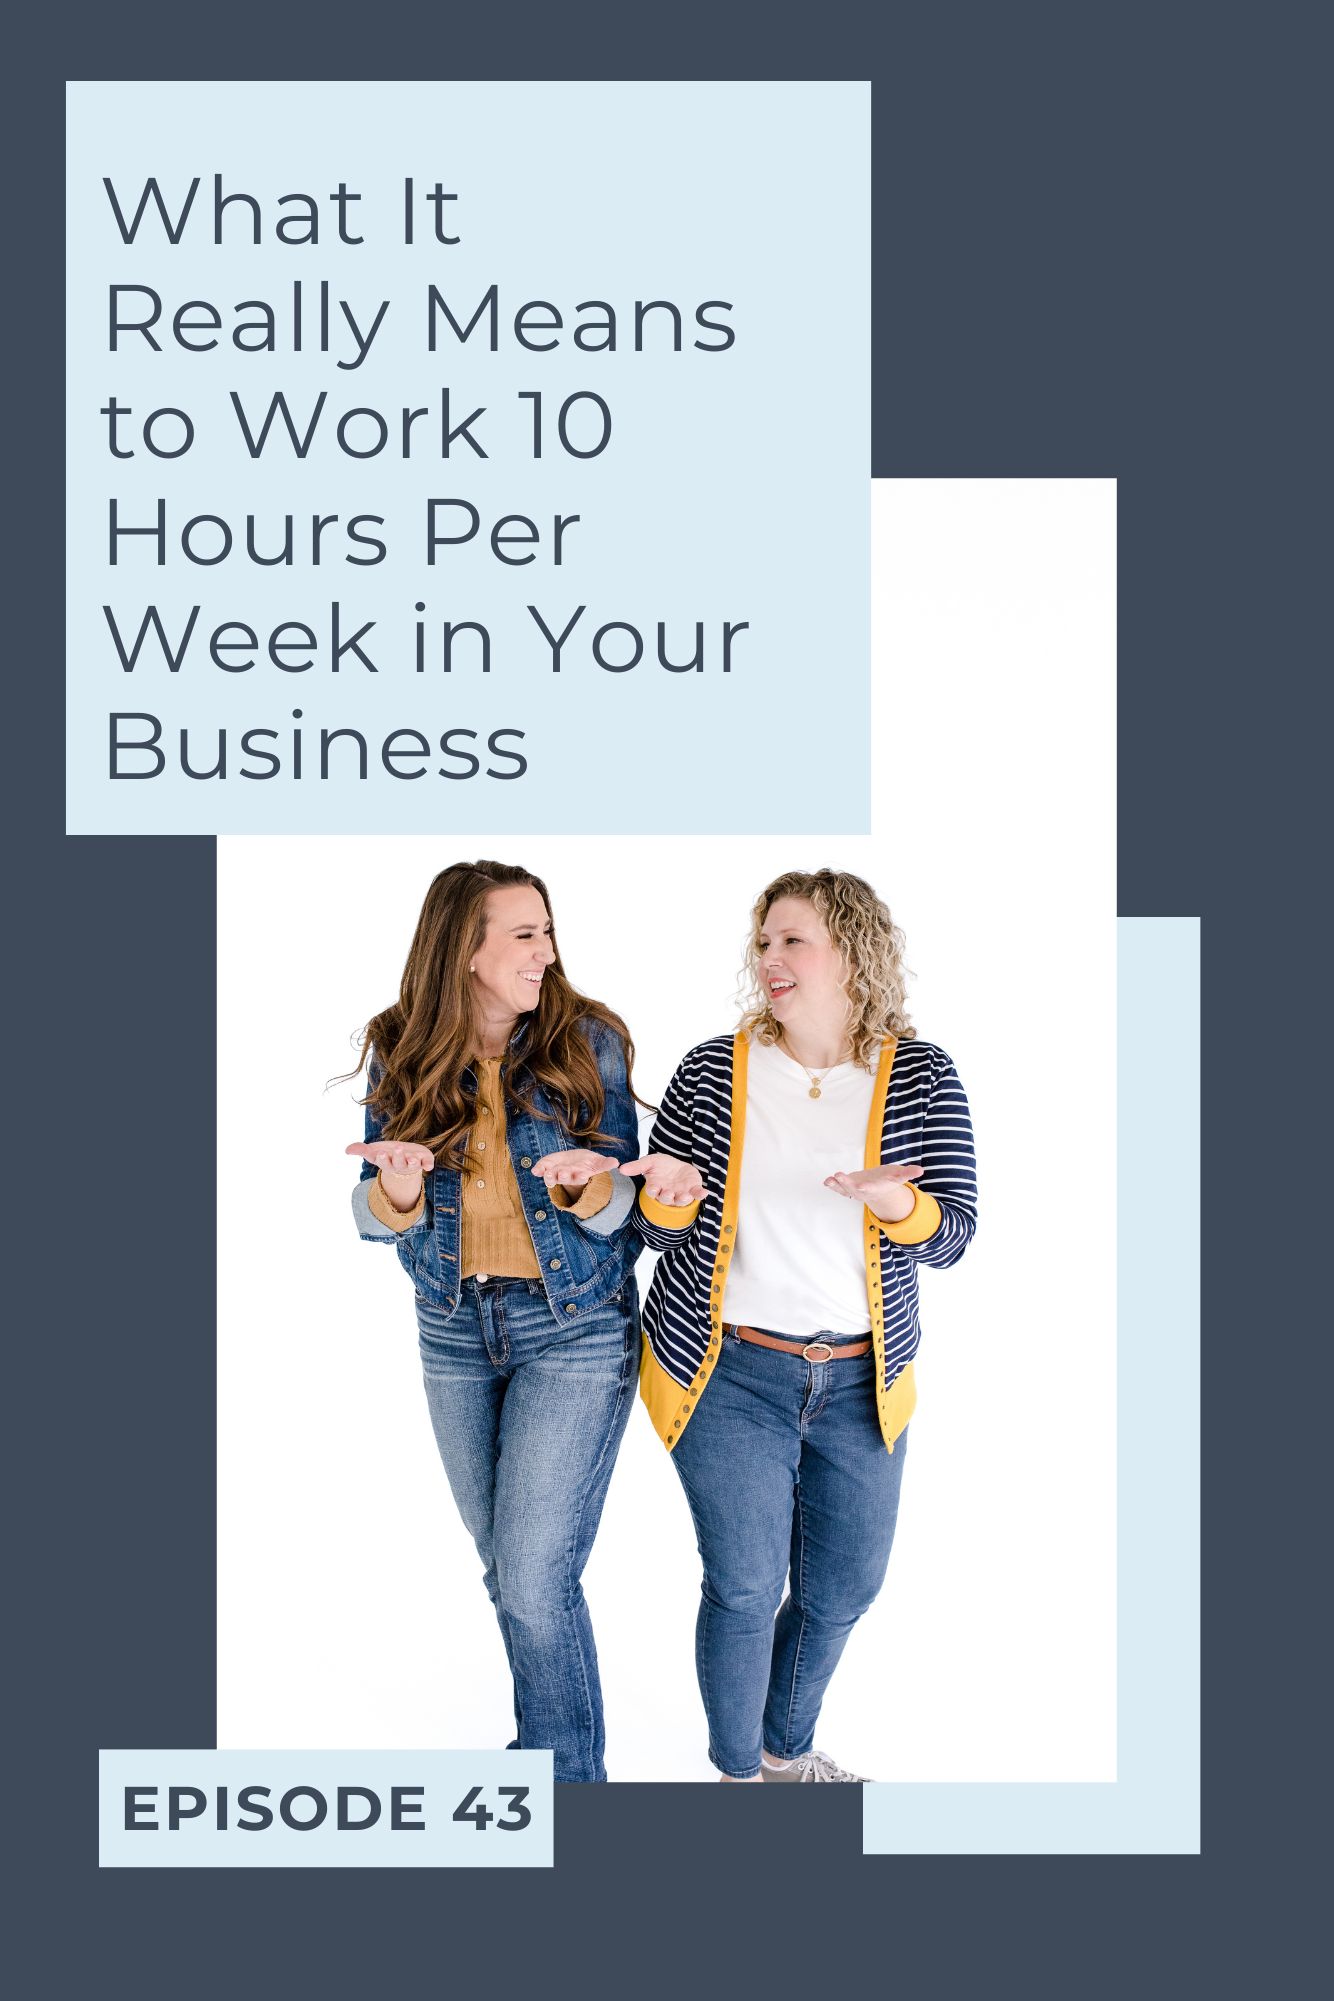 An image of two Christian women in business talking about their podcast about what it really means to work 10 hours per week in your business